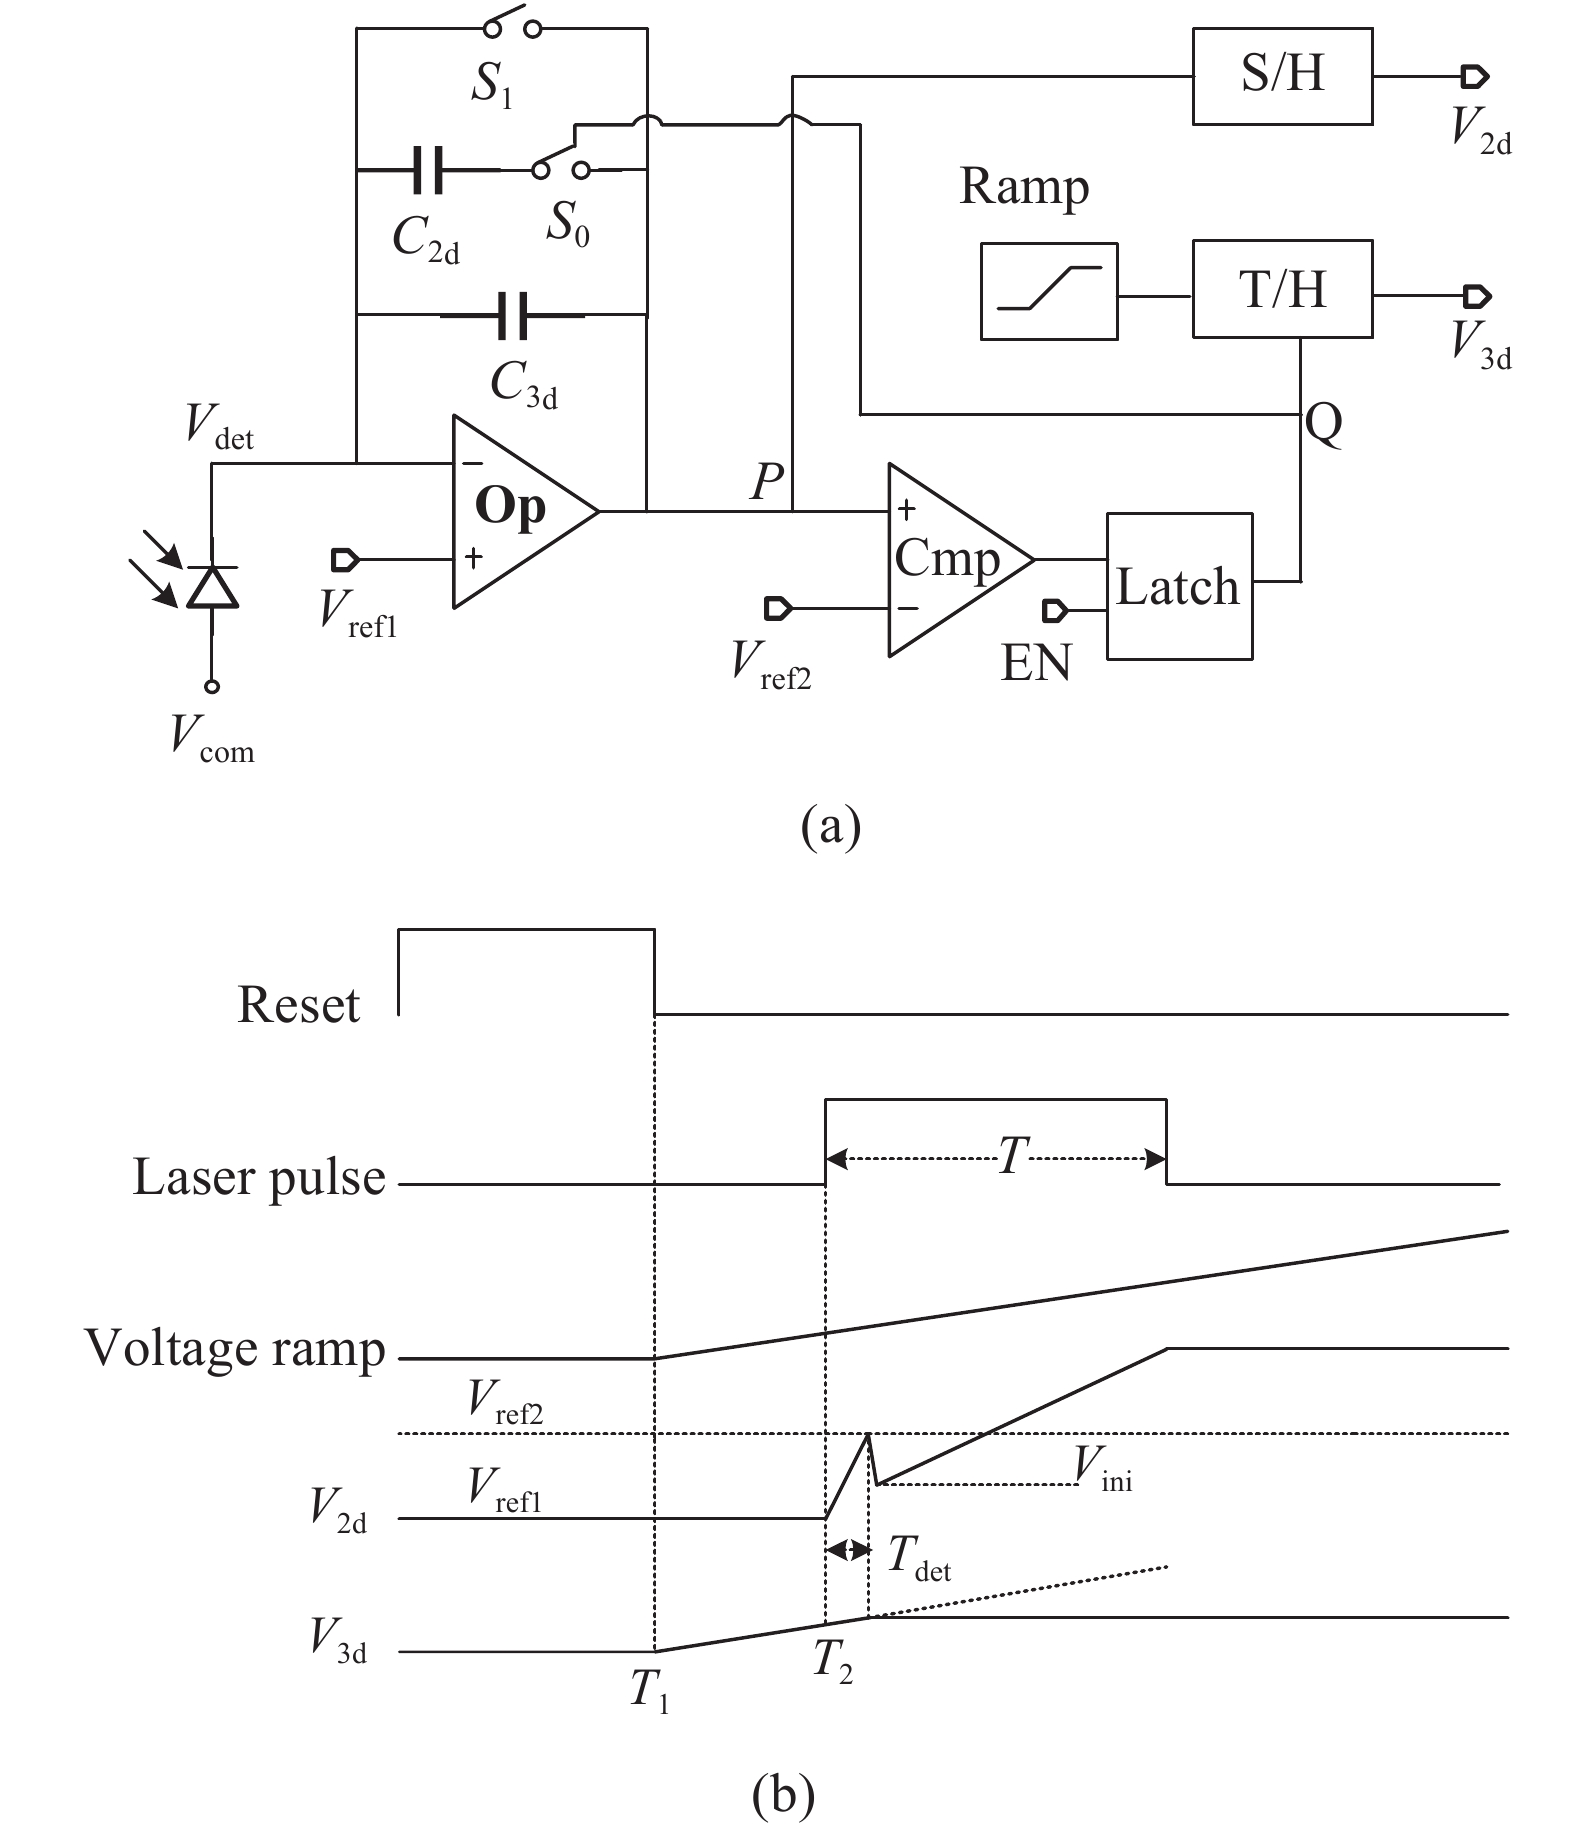 (a) APD readout circuit Unit structure; (b) APD readout circuit working sequence